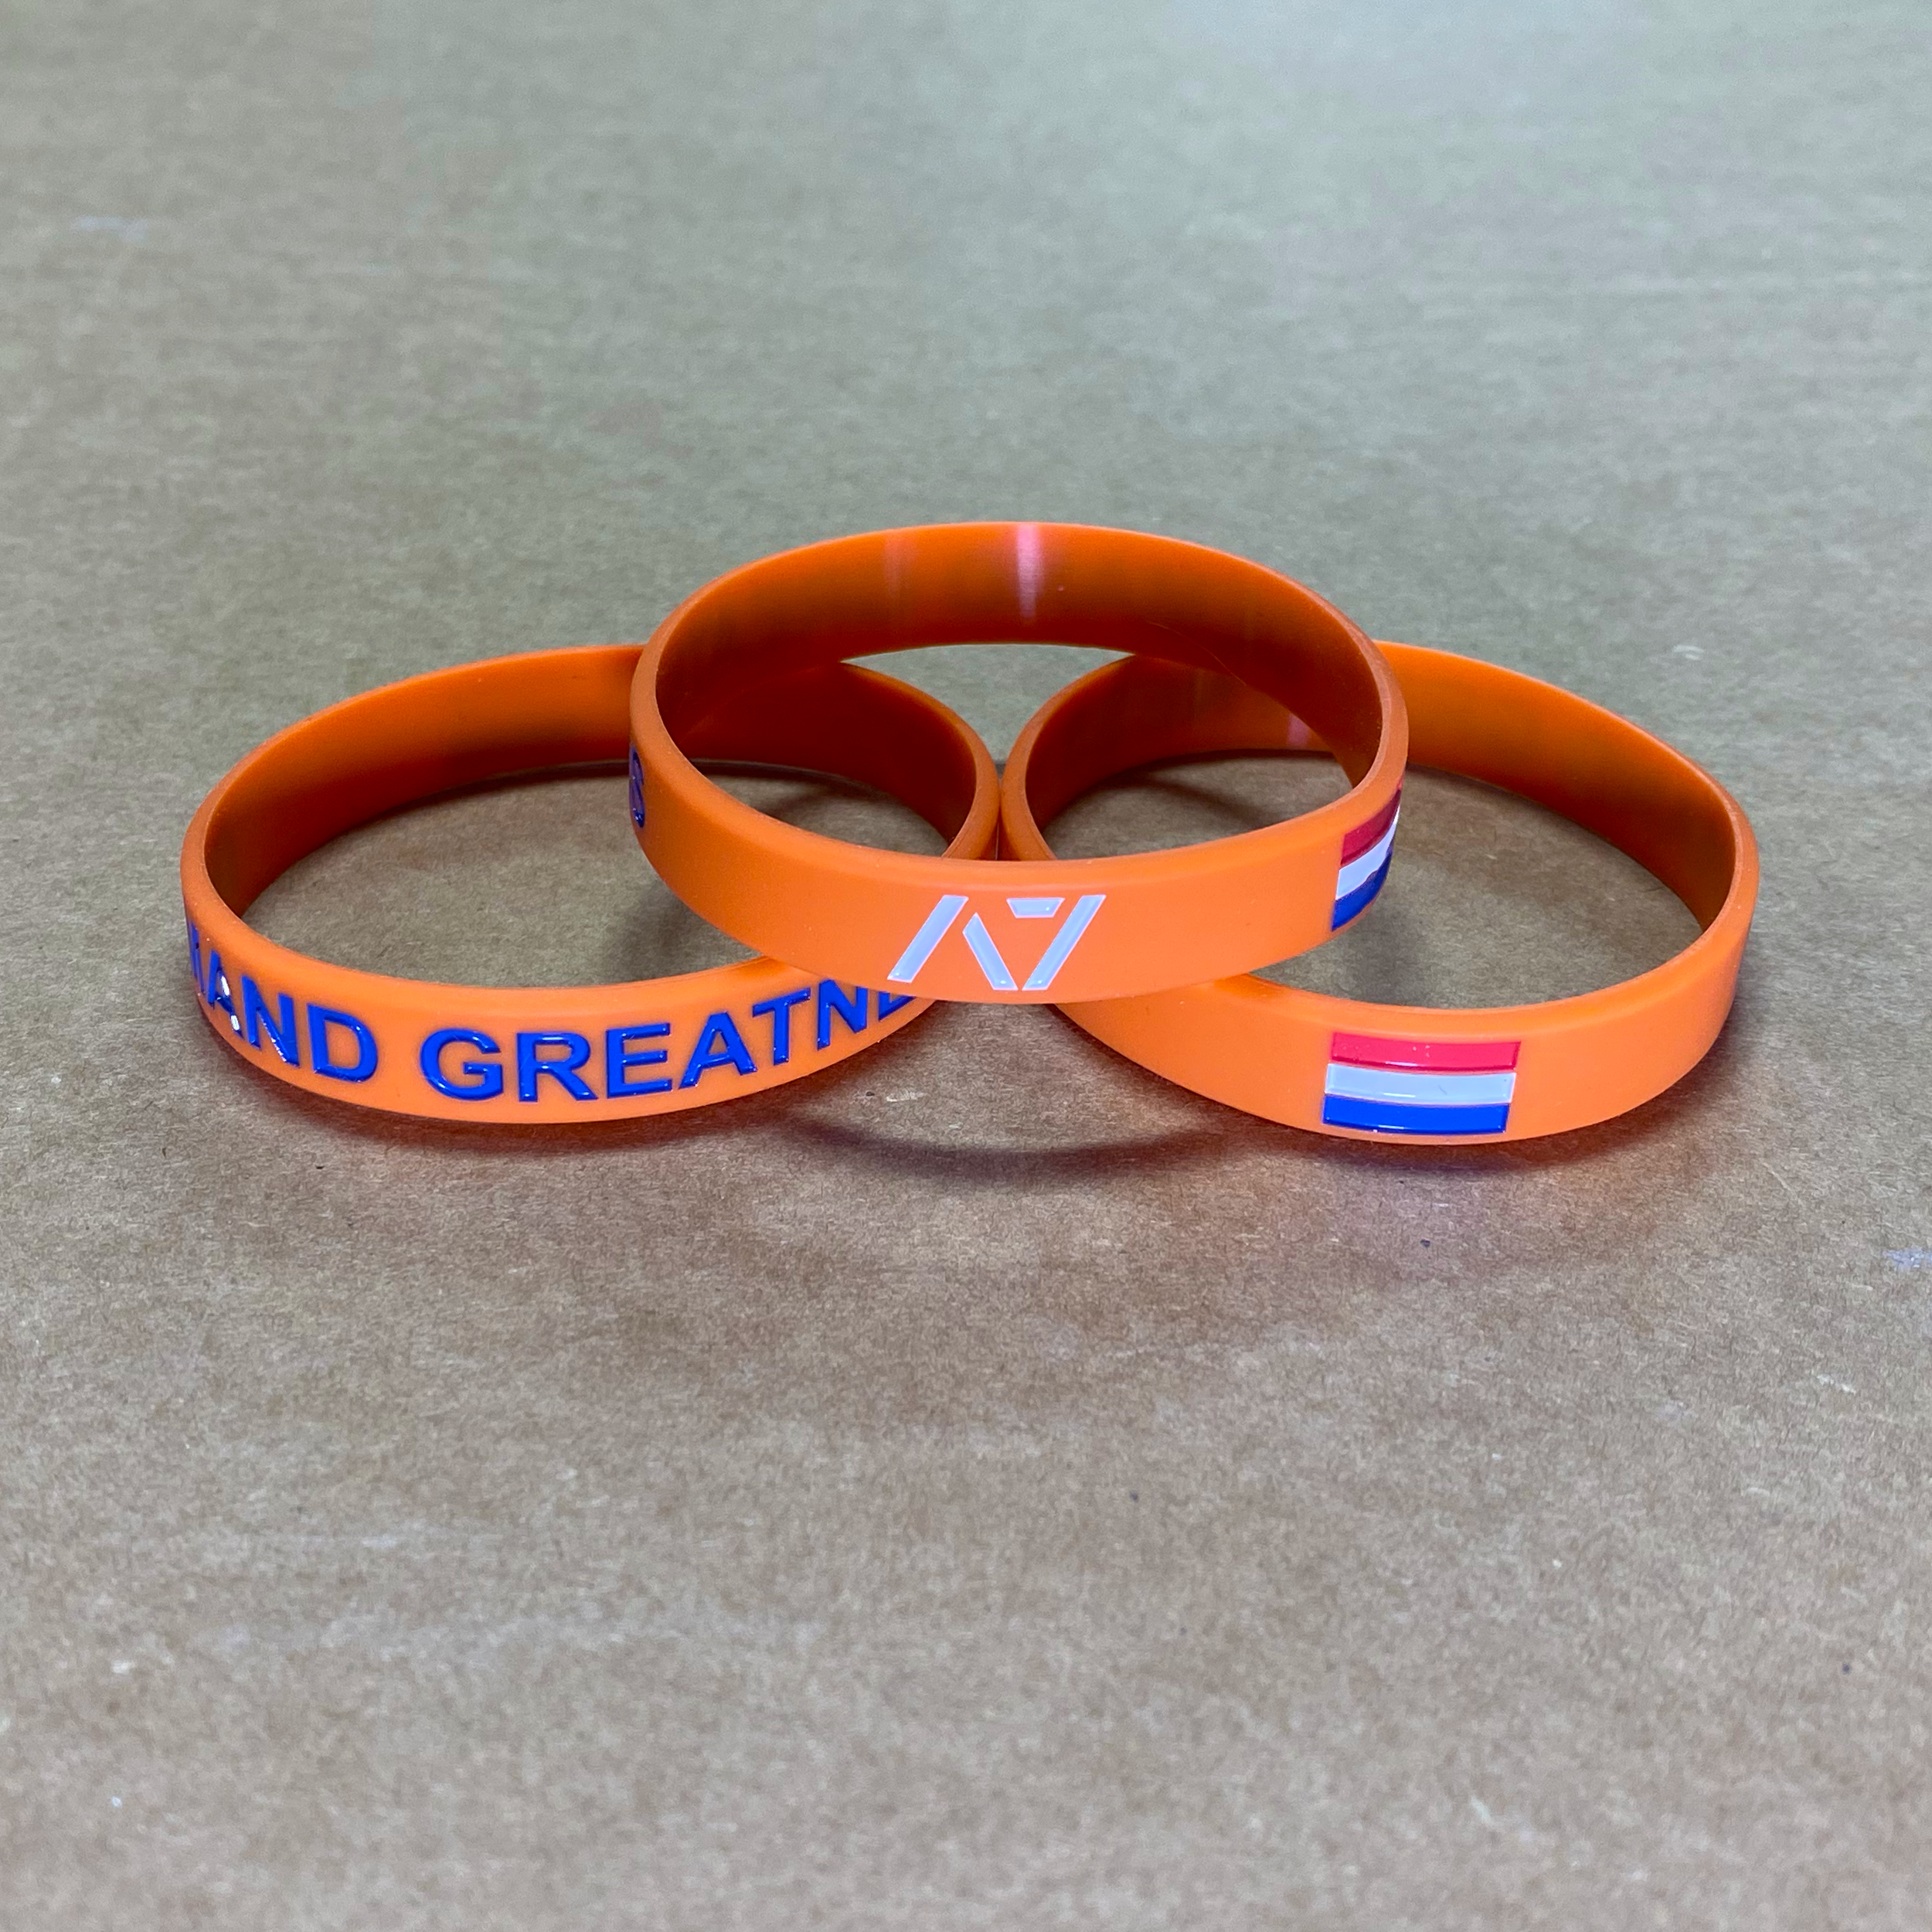 You are always working towards your goals and helping others reach their full potential. Feel the Dutch spirit with this country wristband design that incorporates the Dutch flag into a wristband and reminds you to always Demand Greatness. The wristband is 1/2 inch wide and features black debossed lettering.